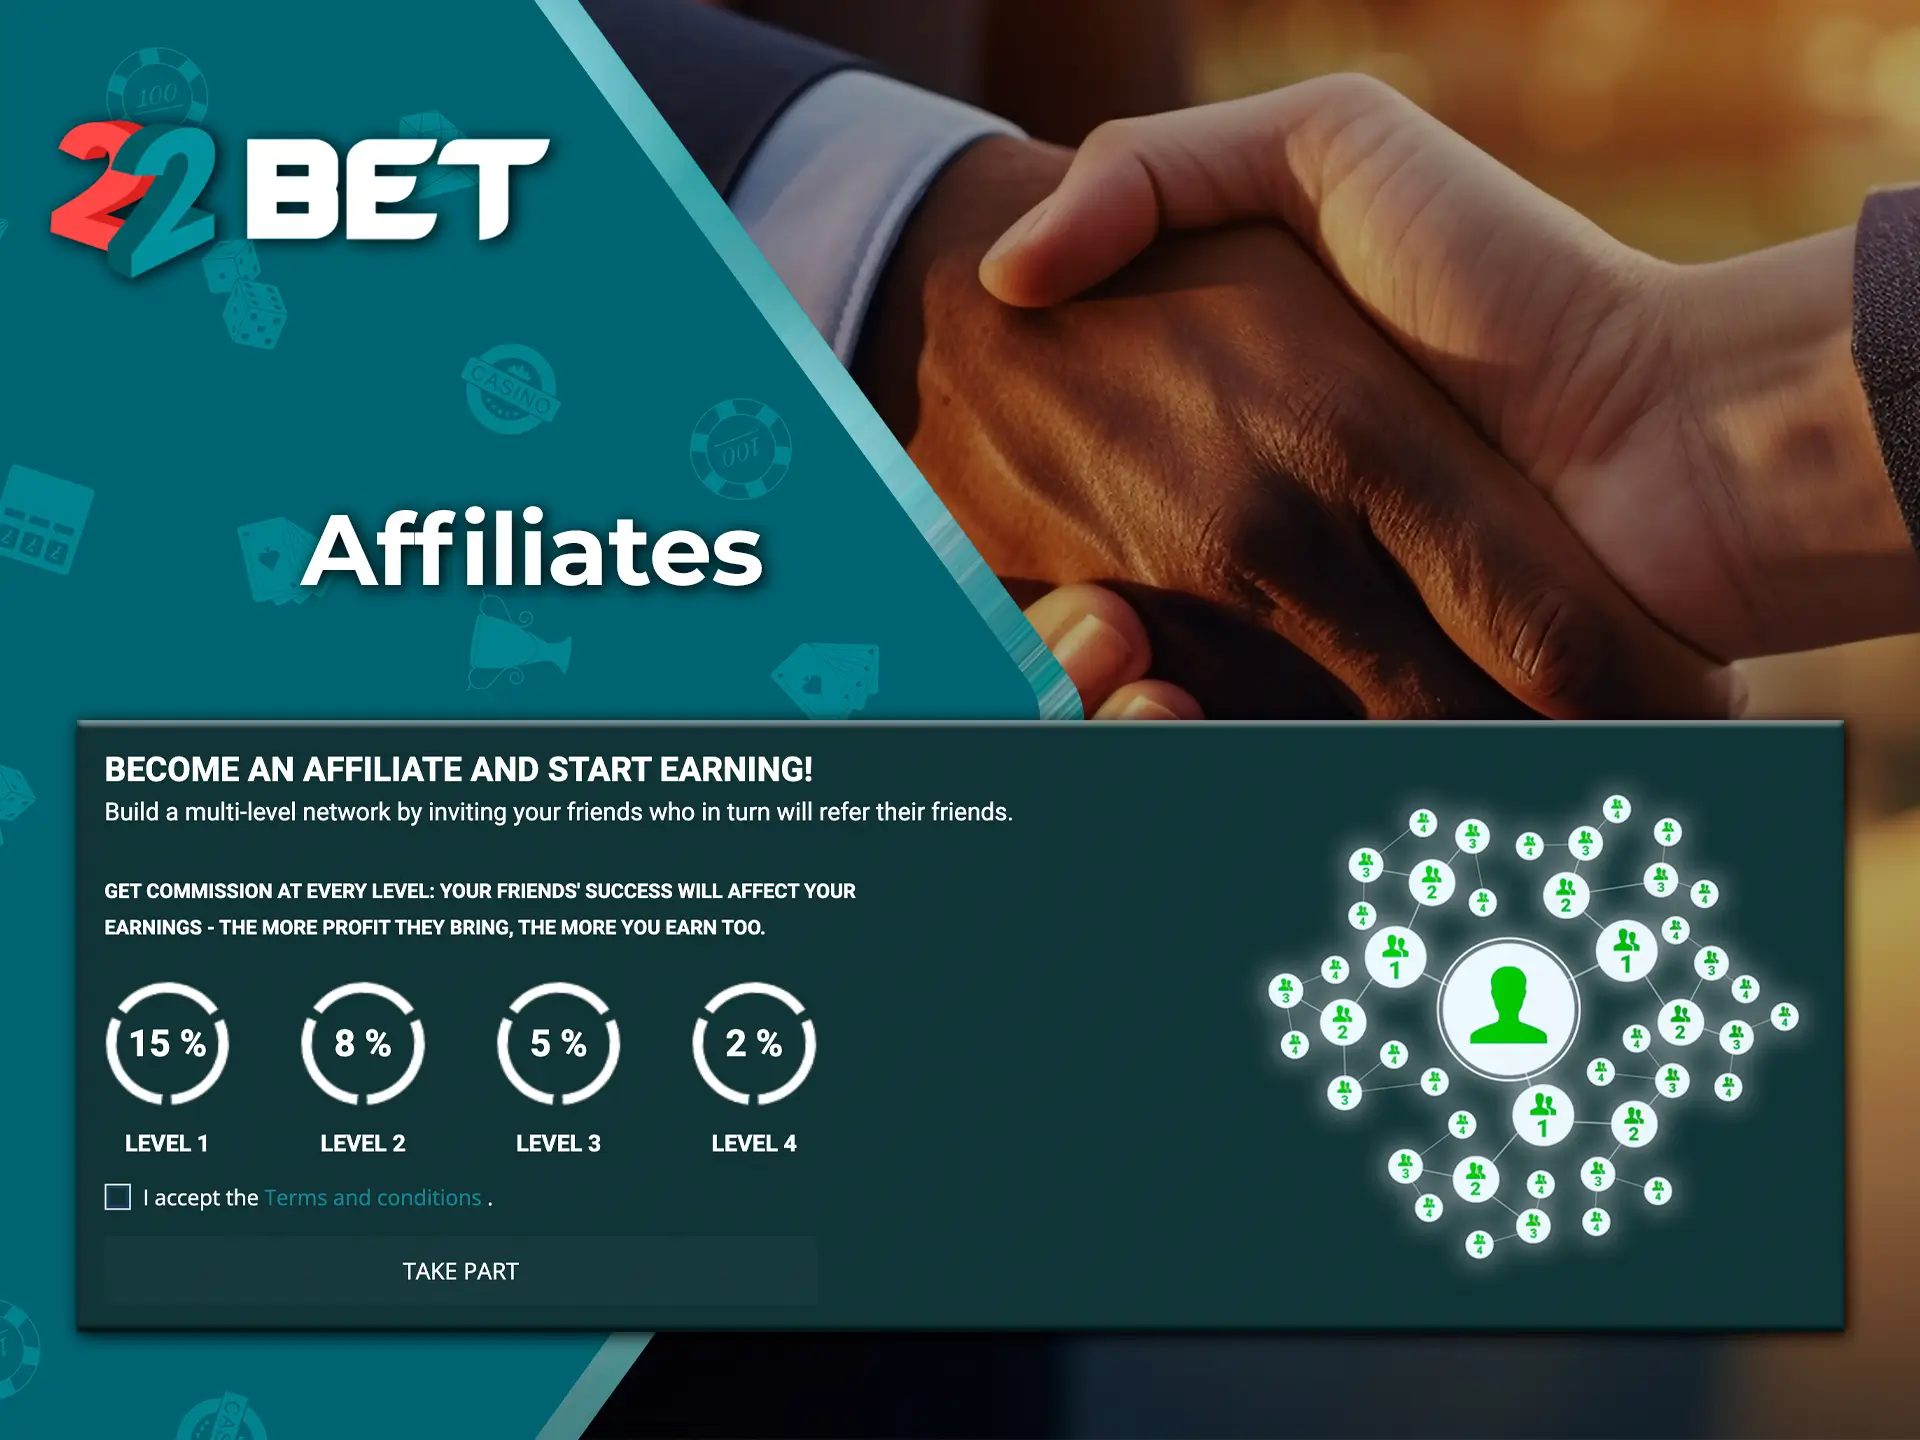 Play together with your friends and acquaintances at 22Bet Casino and get awesome rewards.